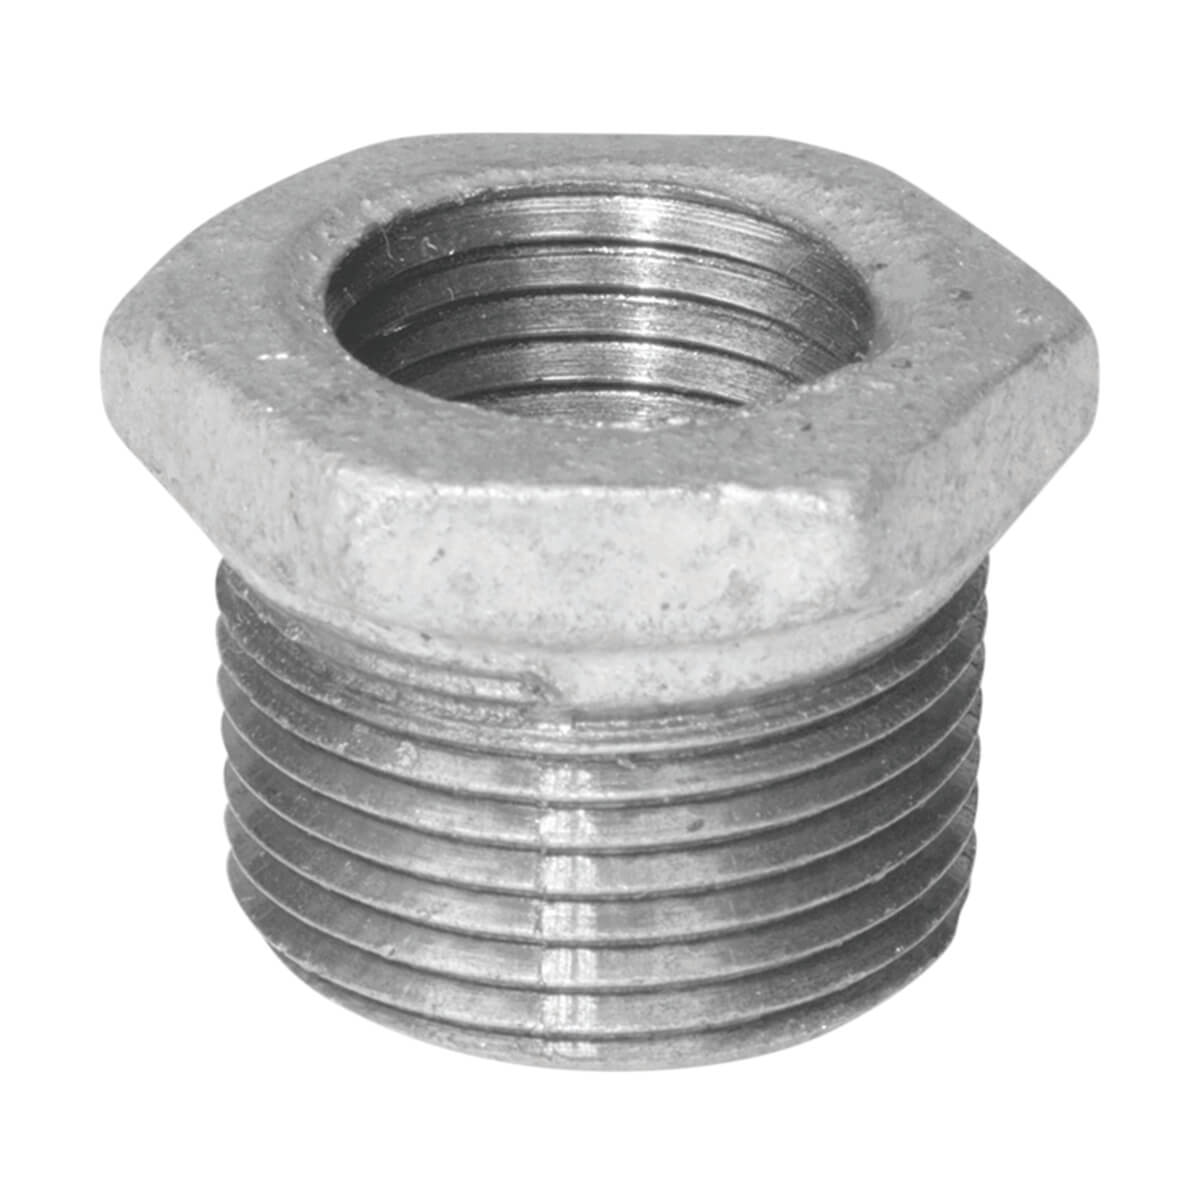 Fitting Galvanized Iron Hex Bushing - ¾-in x ½-in